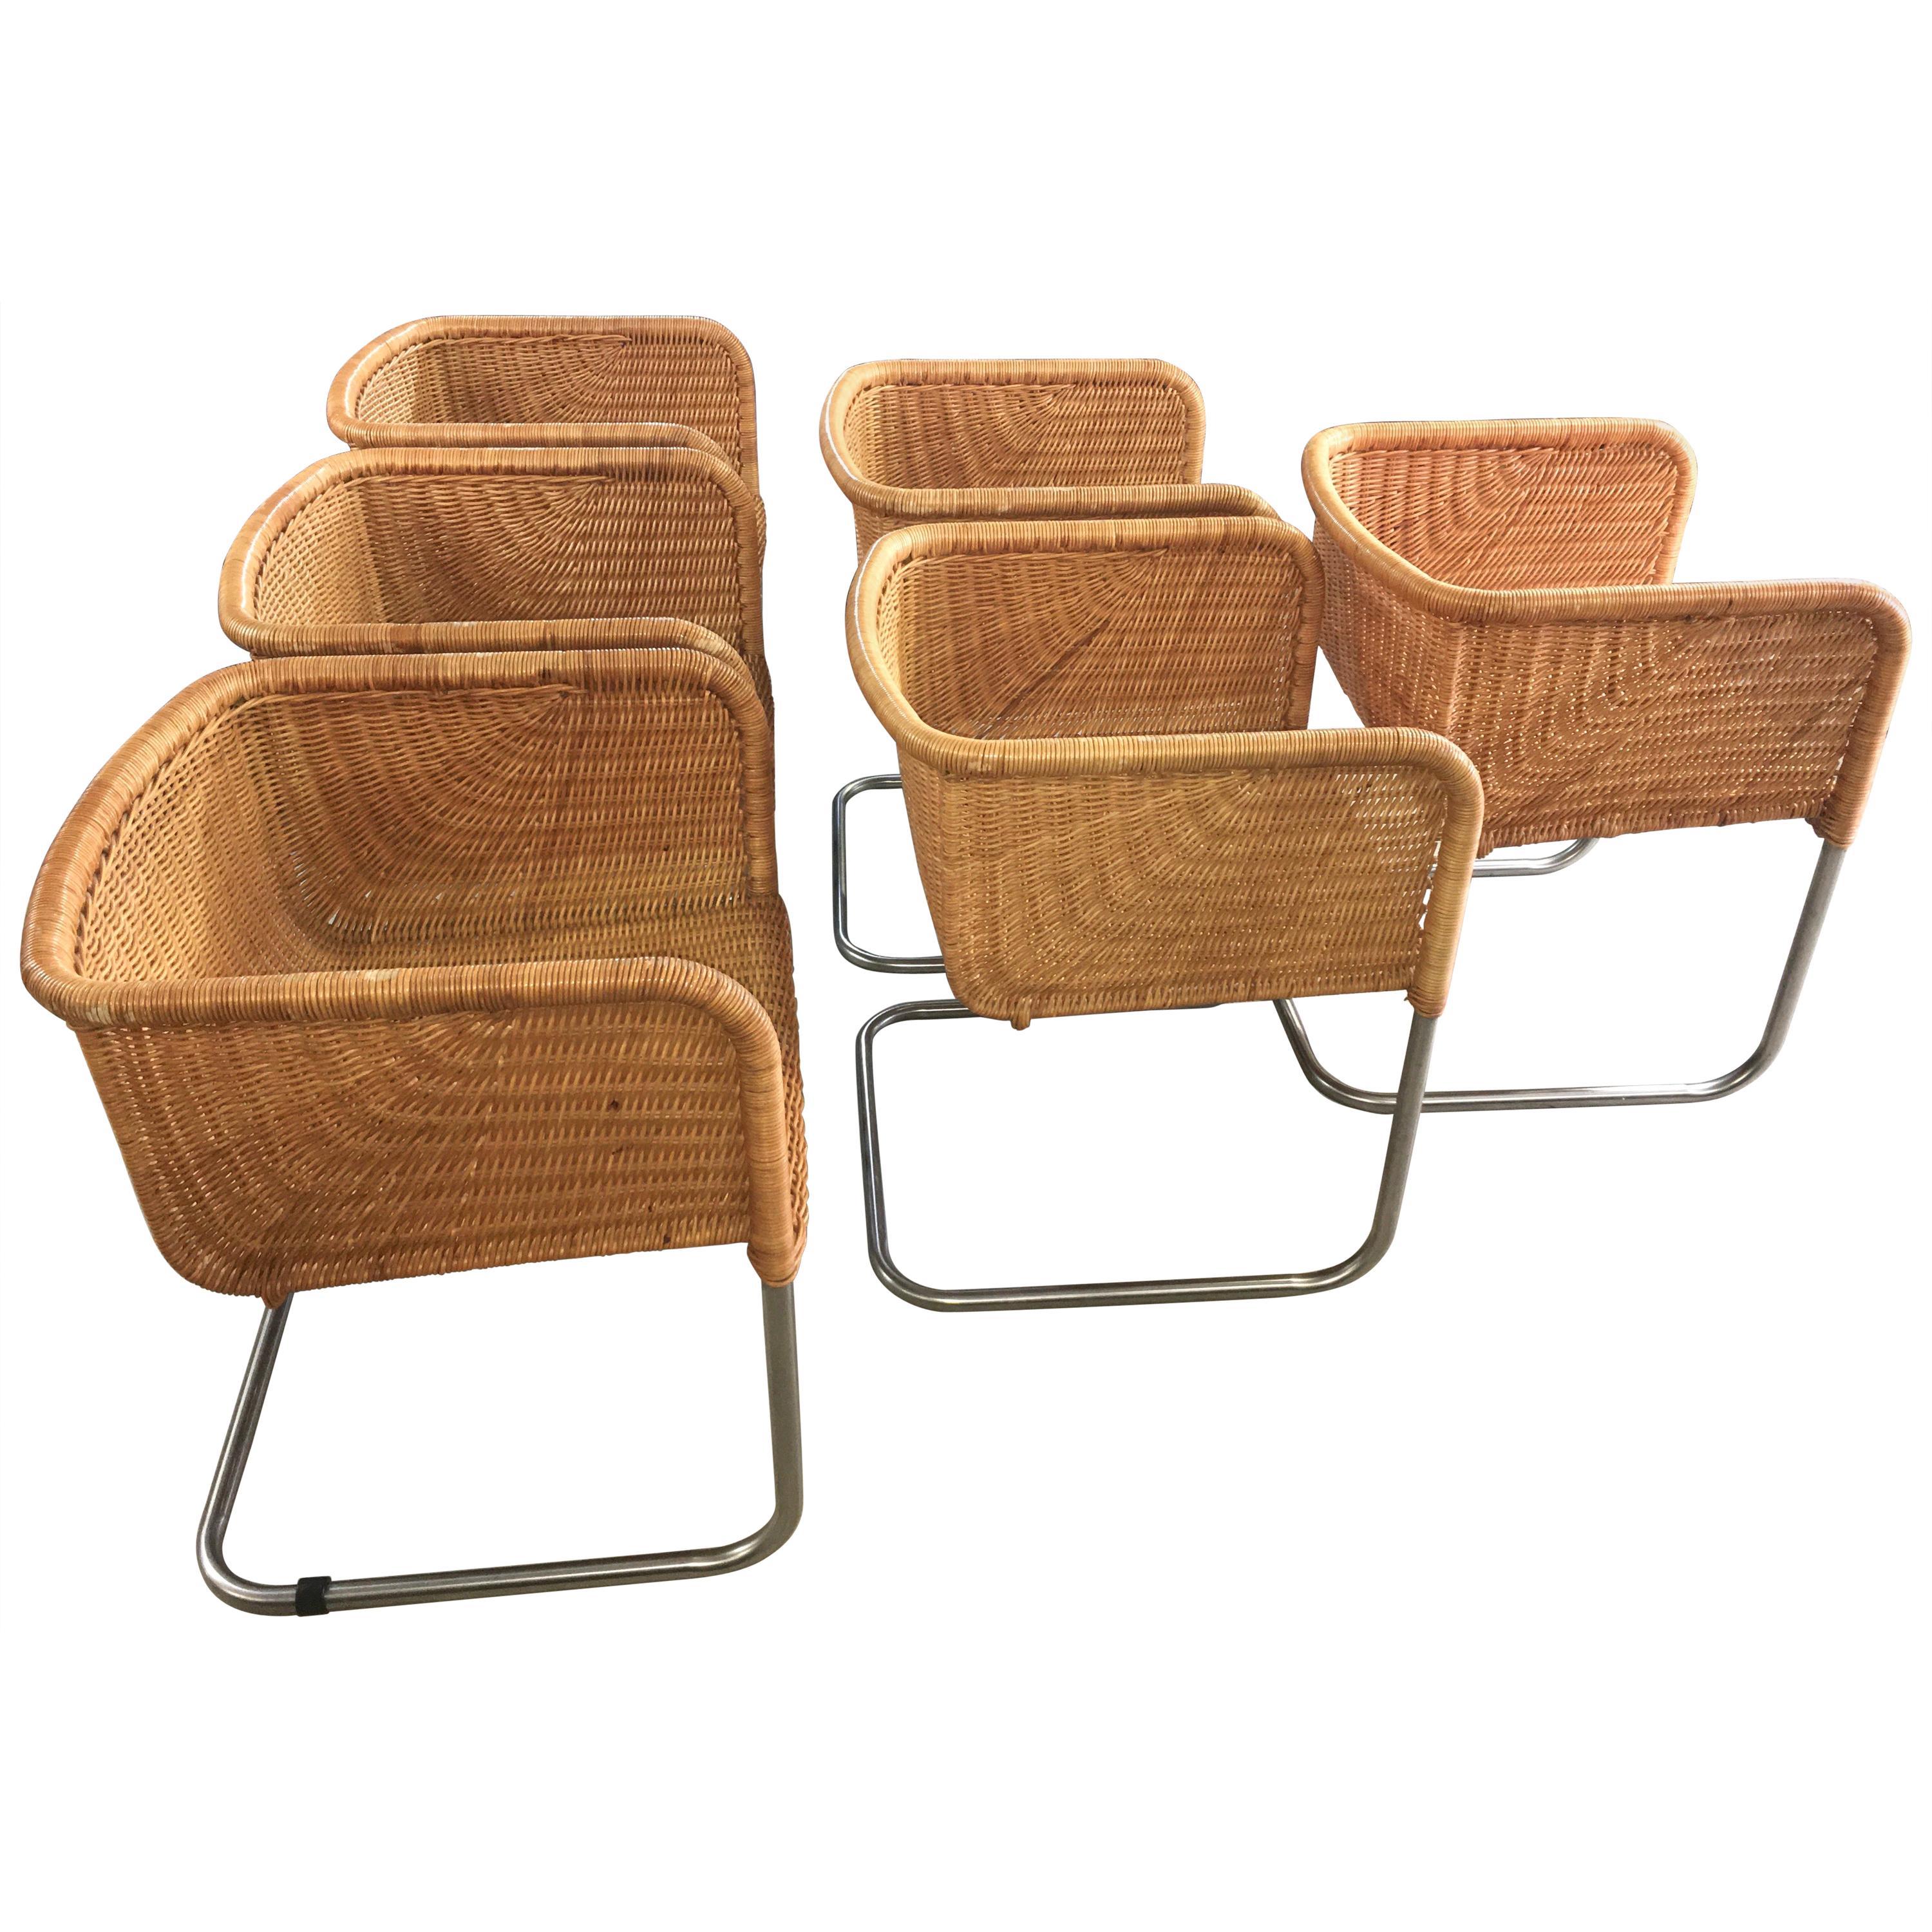 Harvey Probber Wicker and Chrome Cantilevered Chairs